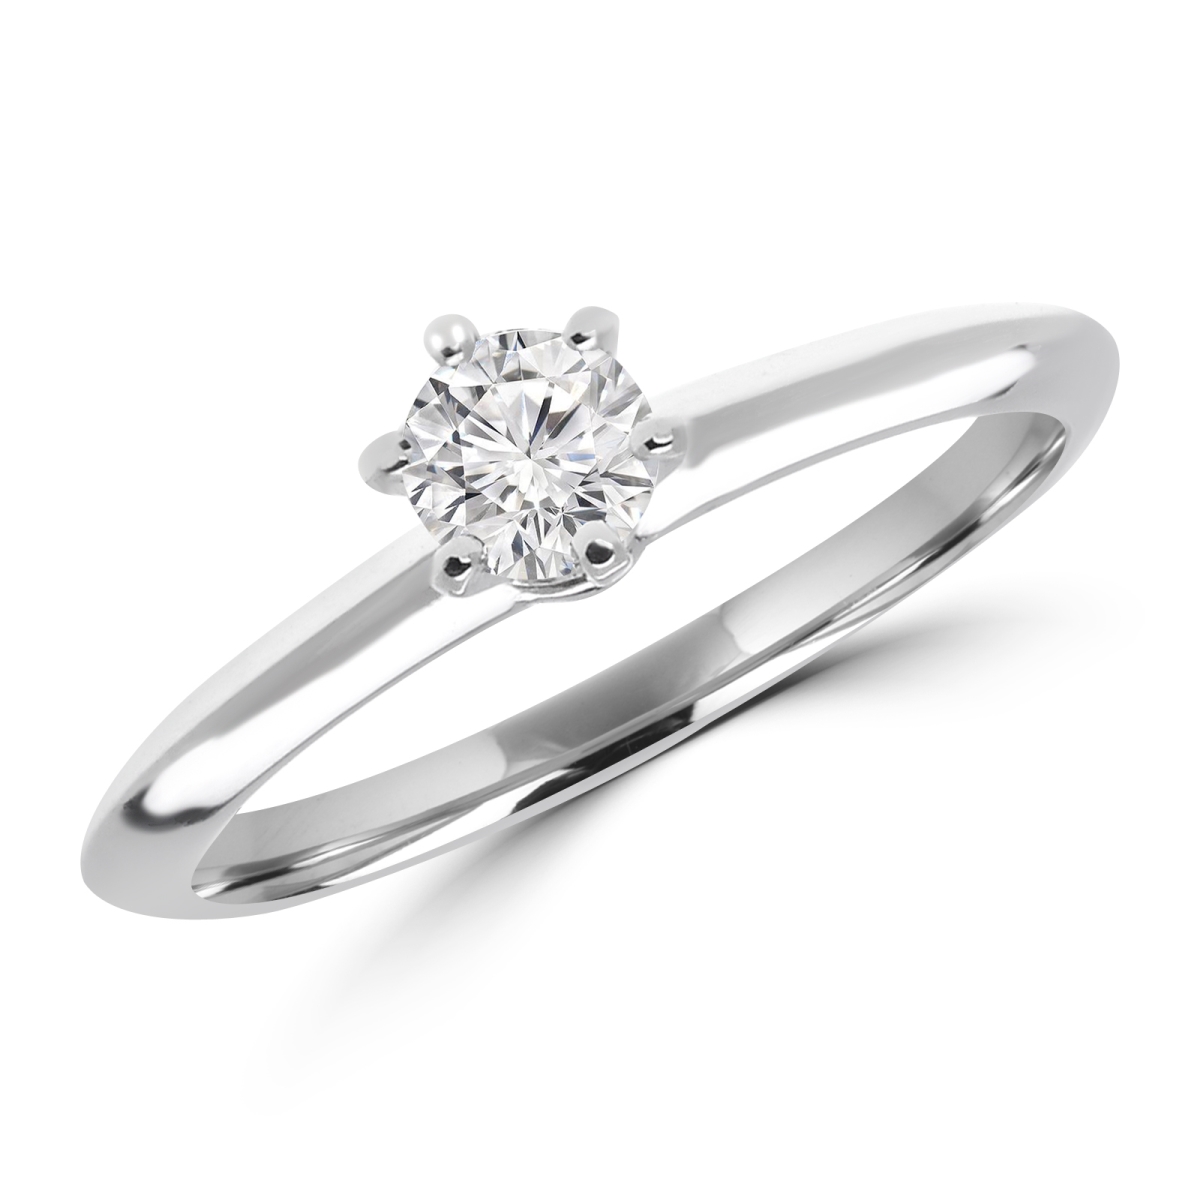 Picture of Majesty Diamonds MD170191-8 0.33 CT Round Diamond Solitaire Engagement Ring in 10K White Gold - Size 8